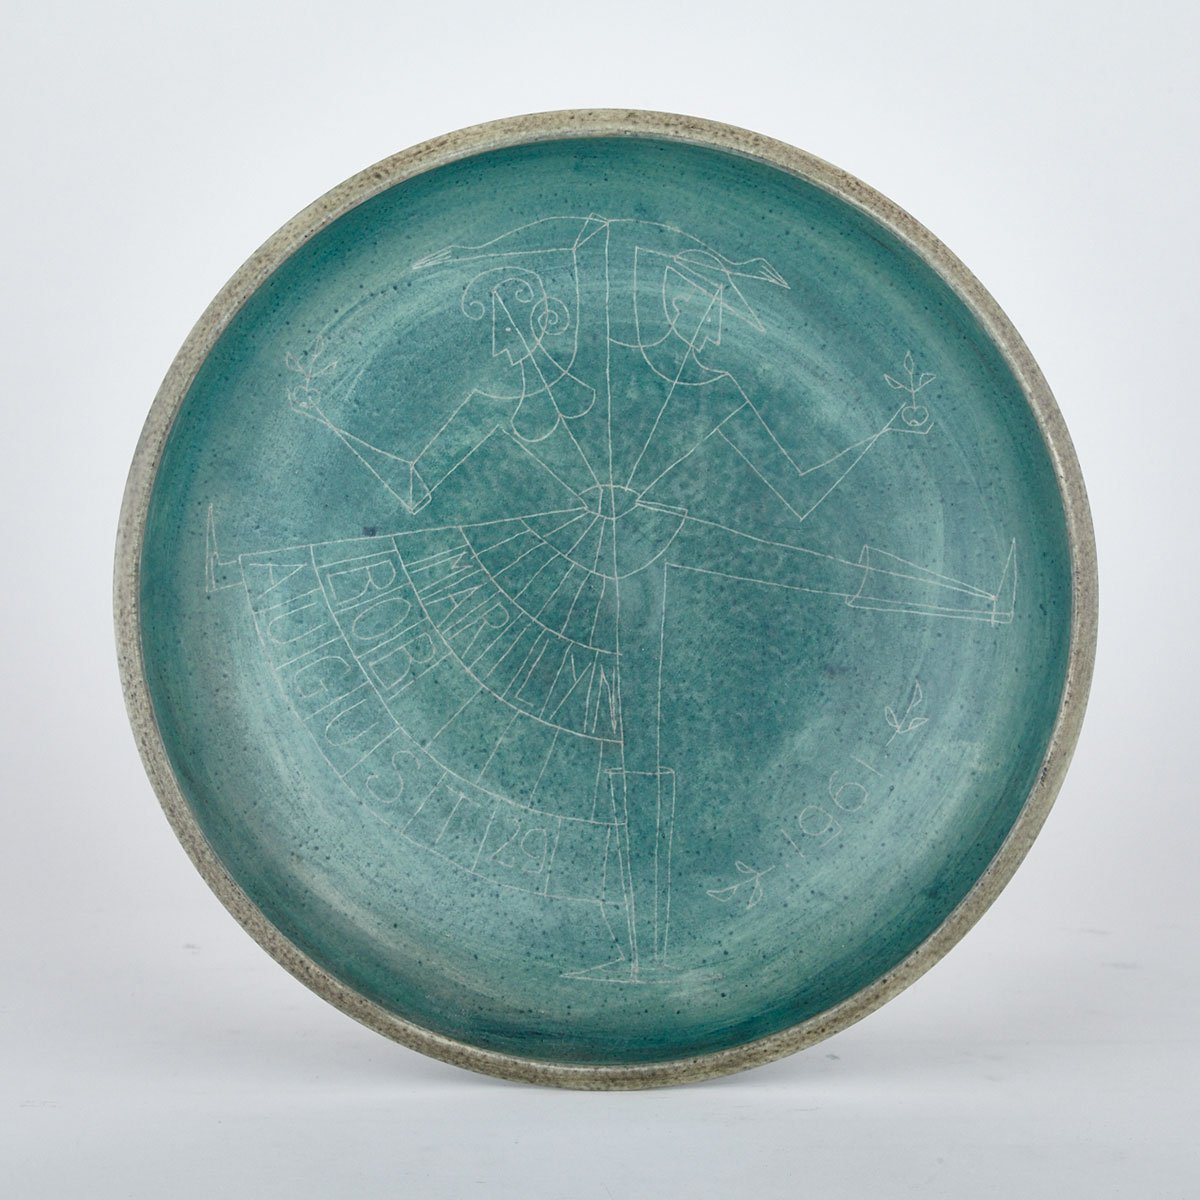 Brooklin Pottery Circular Plaque, Theo and Susan Harlander, dated 1961